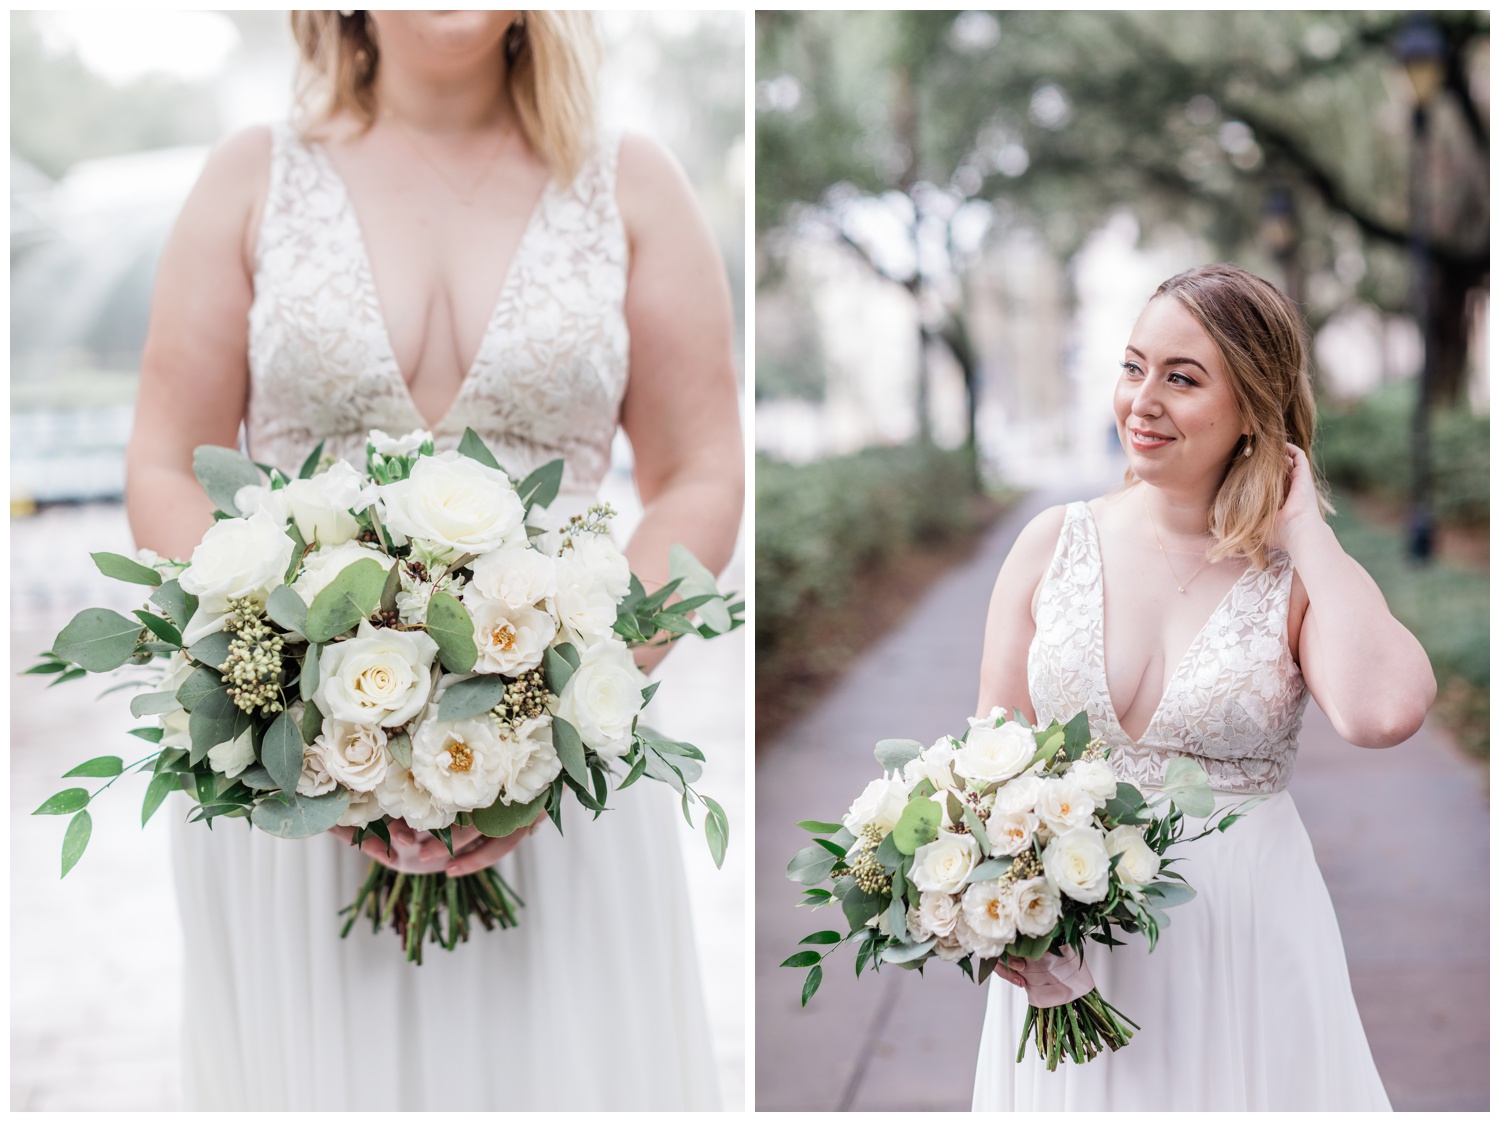 Bridal portraits - the savannah elopement package, flowers by ivory and beau